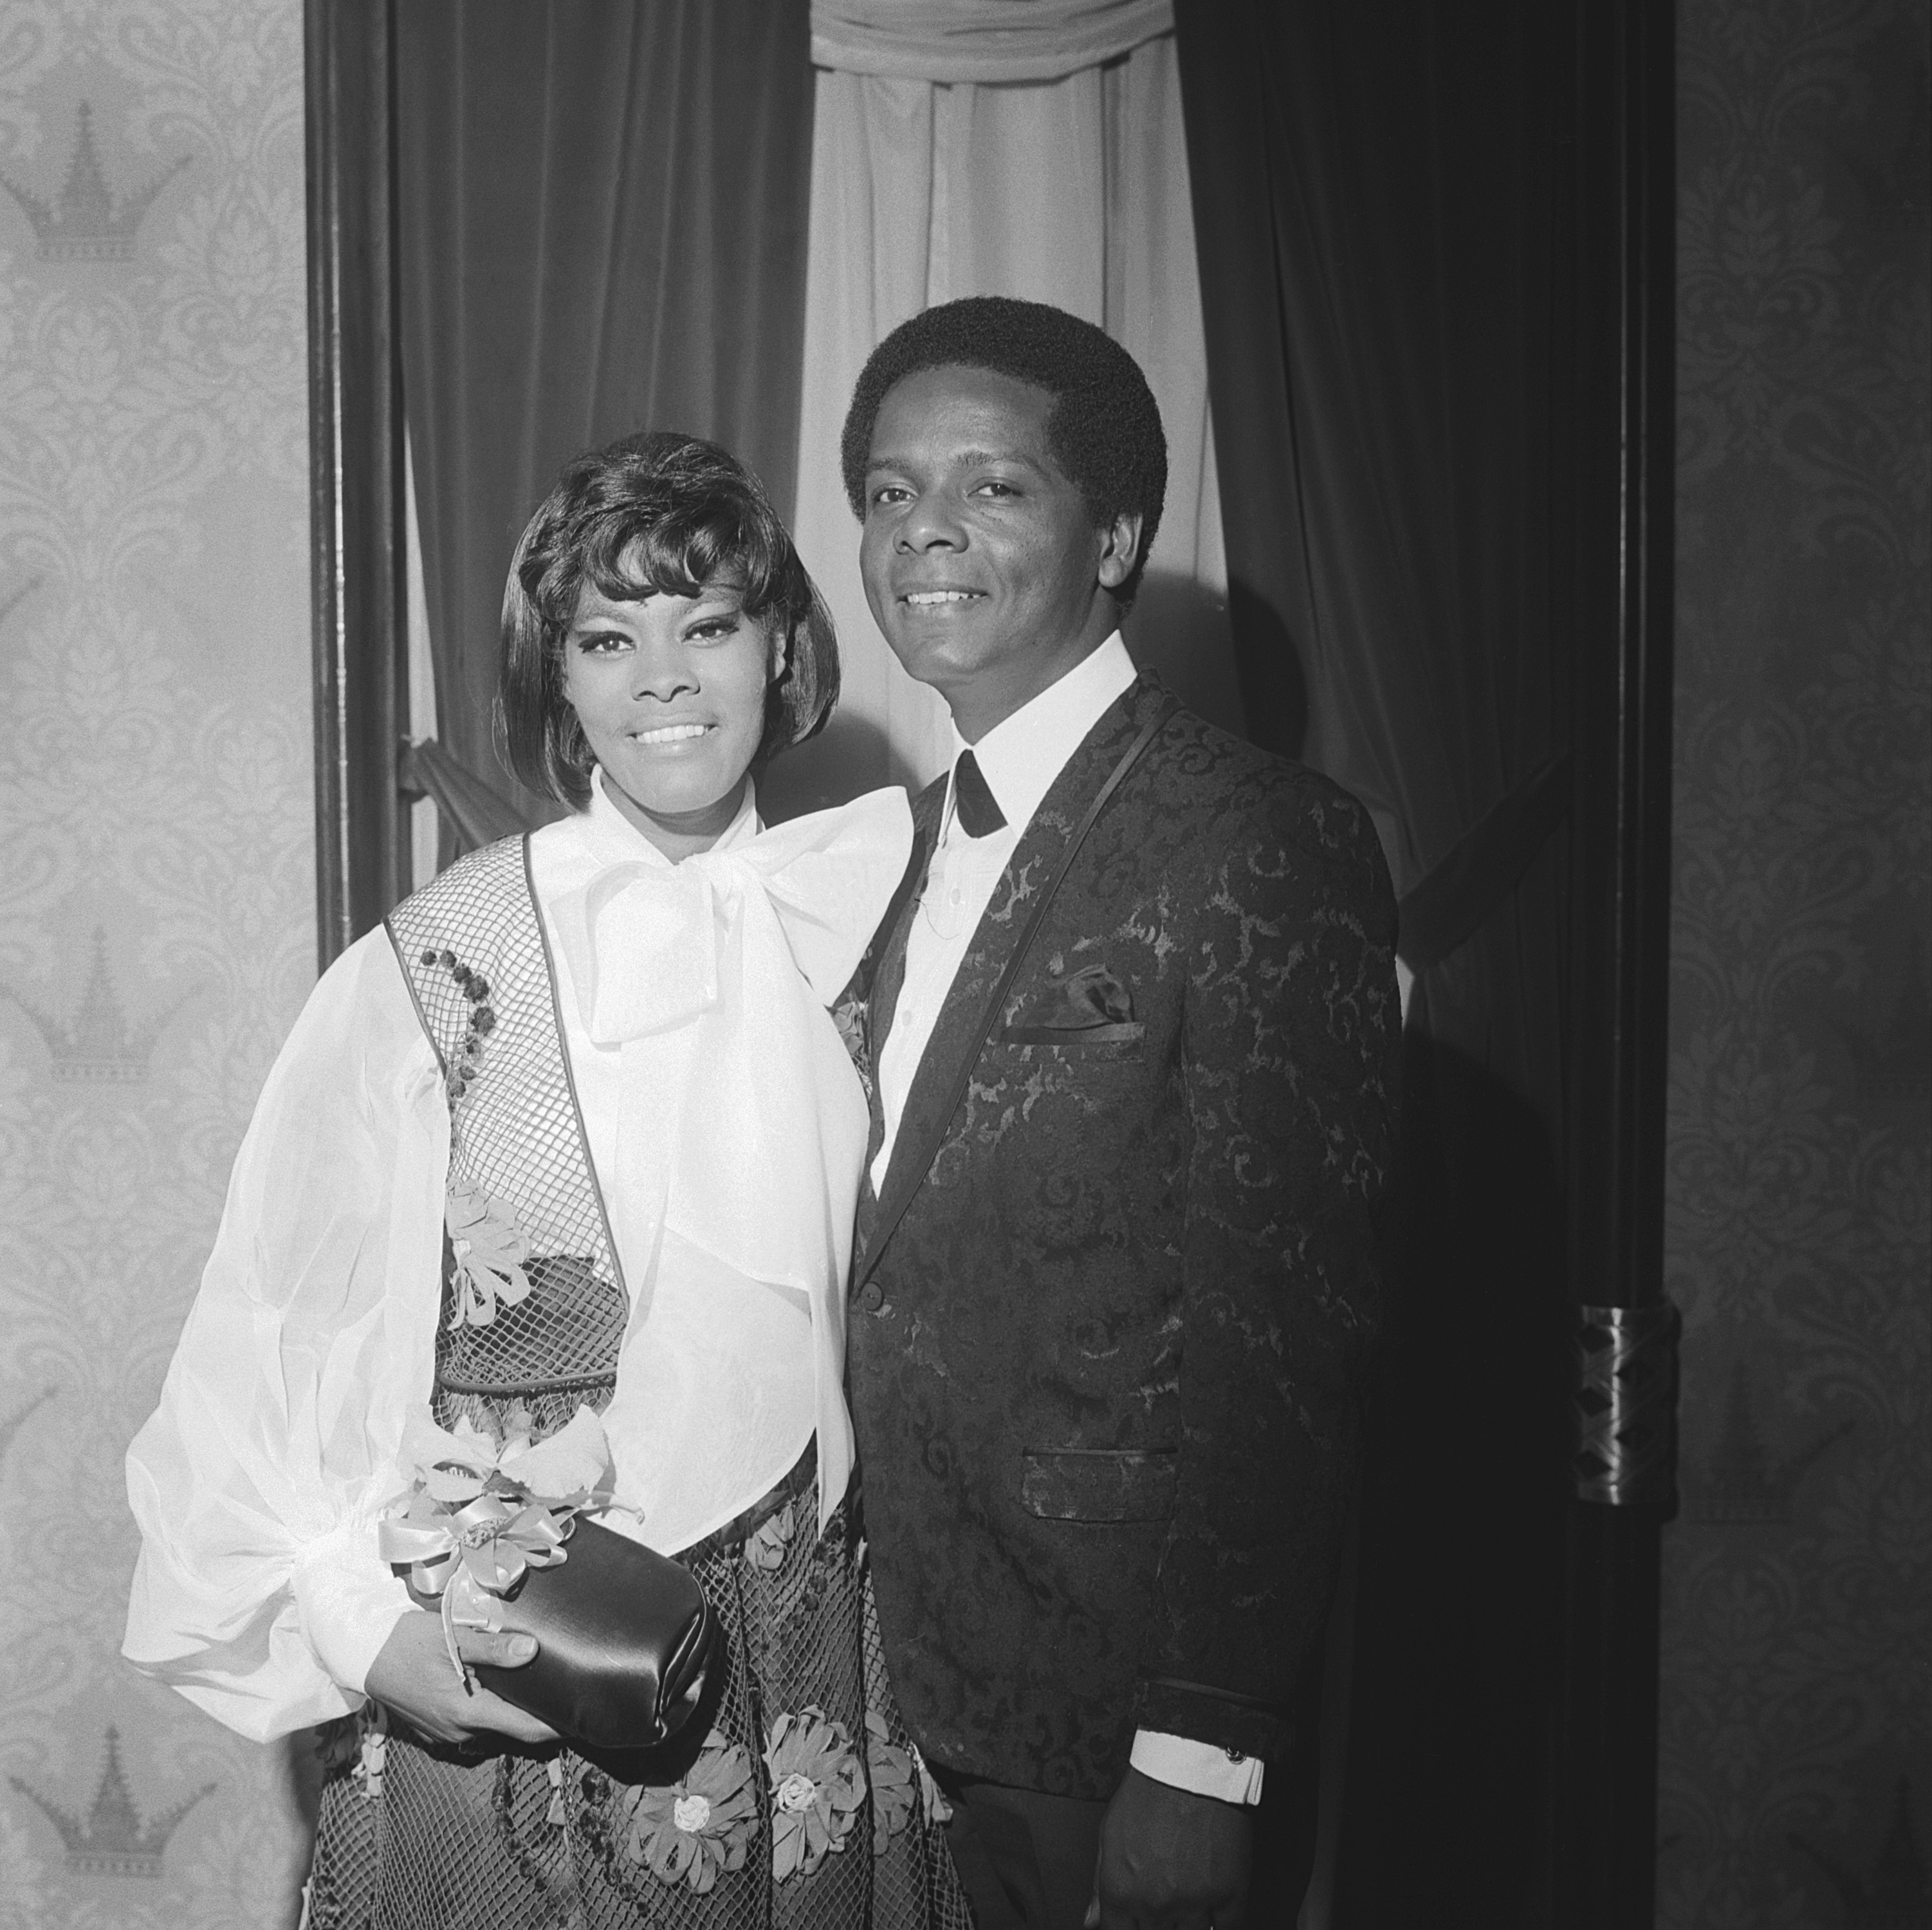 Dionne Warwick and William Elliot at the 11th Annual Grammy Awards on May 5, 1969. | Source: Getty Images